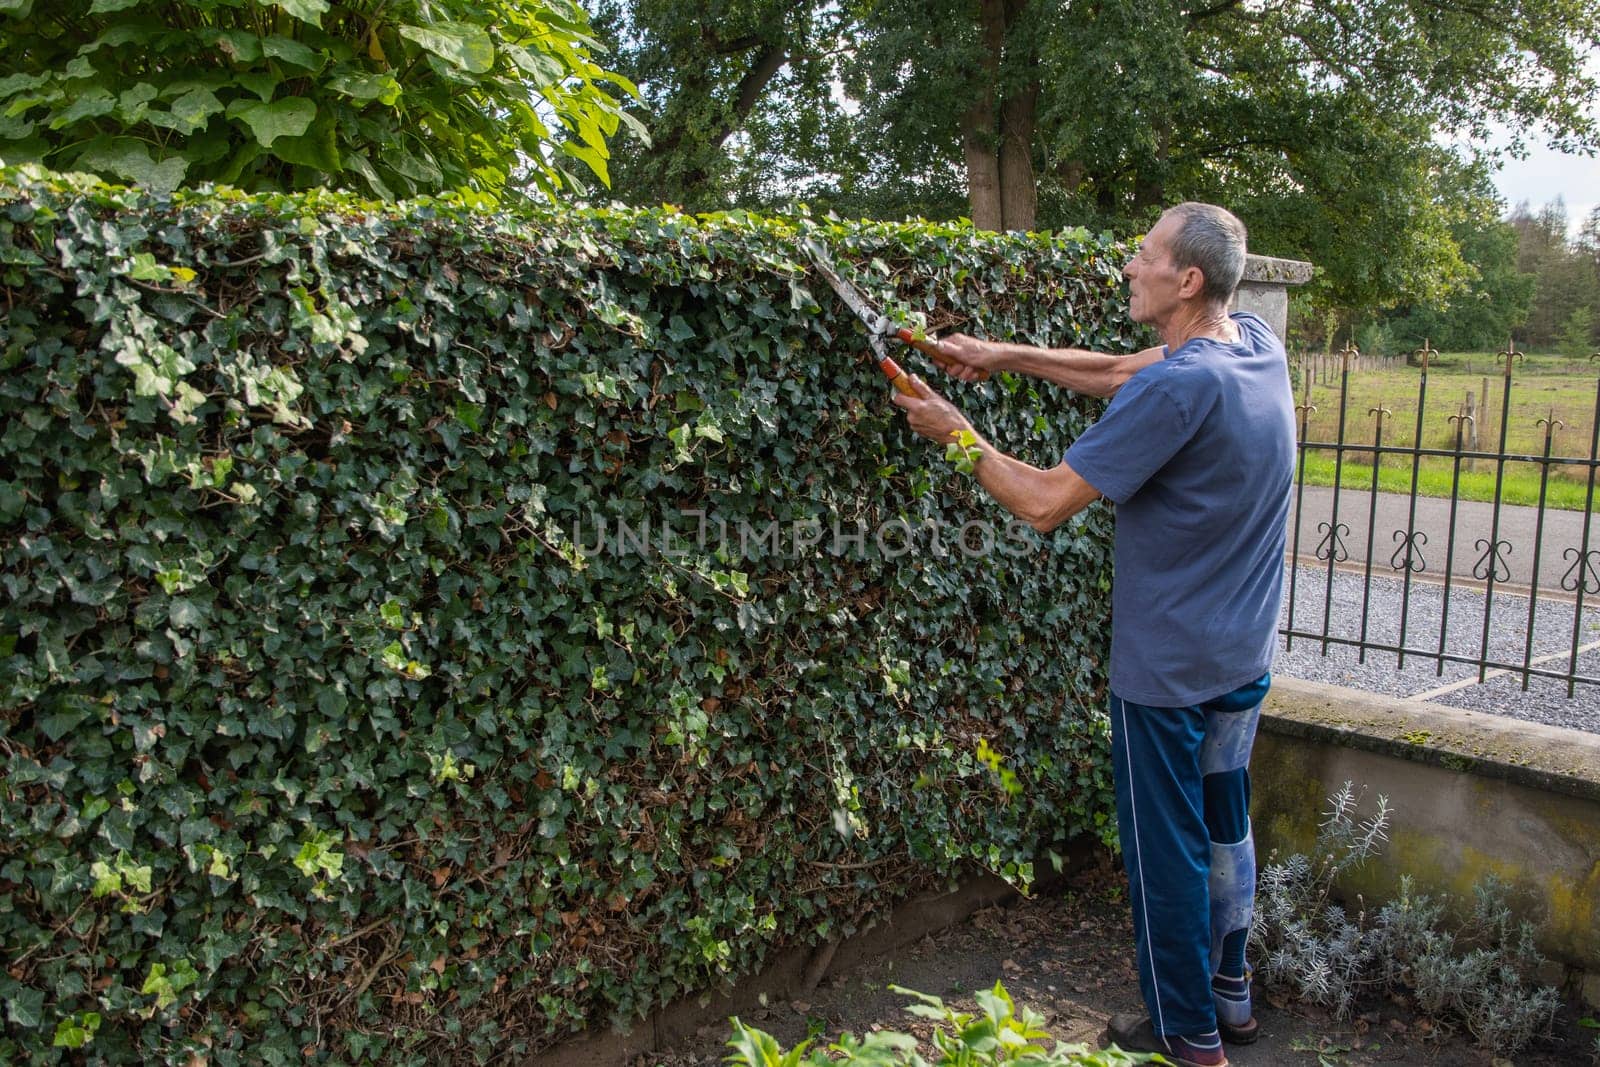 aged gardener with broken leg cuts ivy's fence with a large secateurs,gardening by KaterinaDalemans